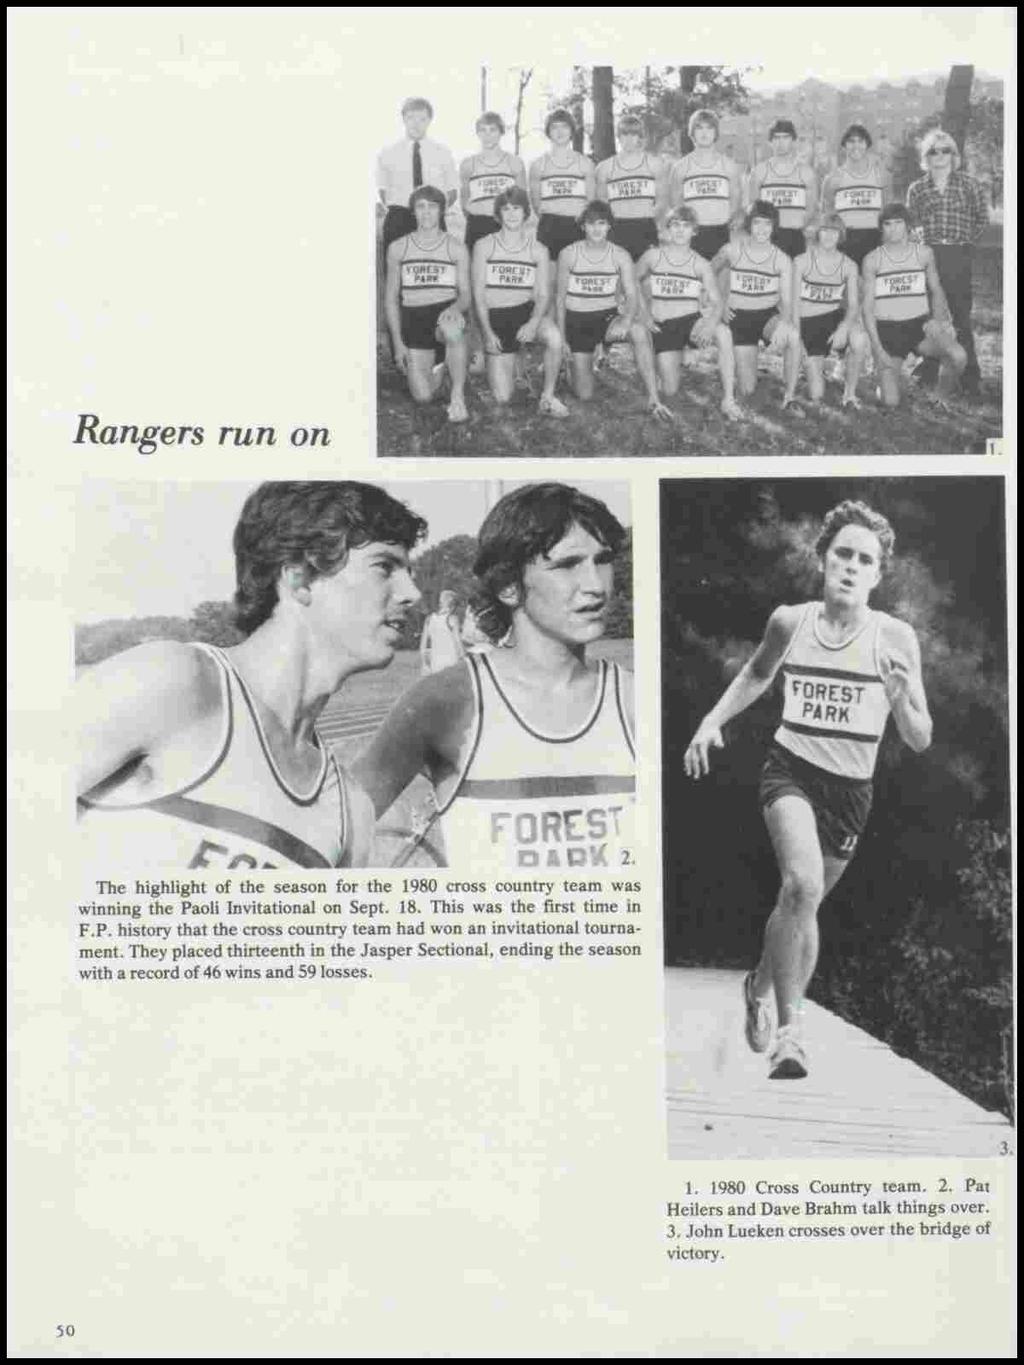 Rangers run on The highlight of the season for the 1980 cross country team was winning the Paoli Invitational on Sept. 18. This was the first time in F.P. history that the cross country team had won an invitational tournament.